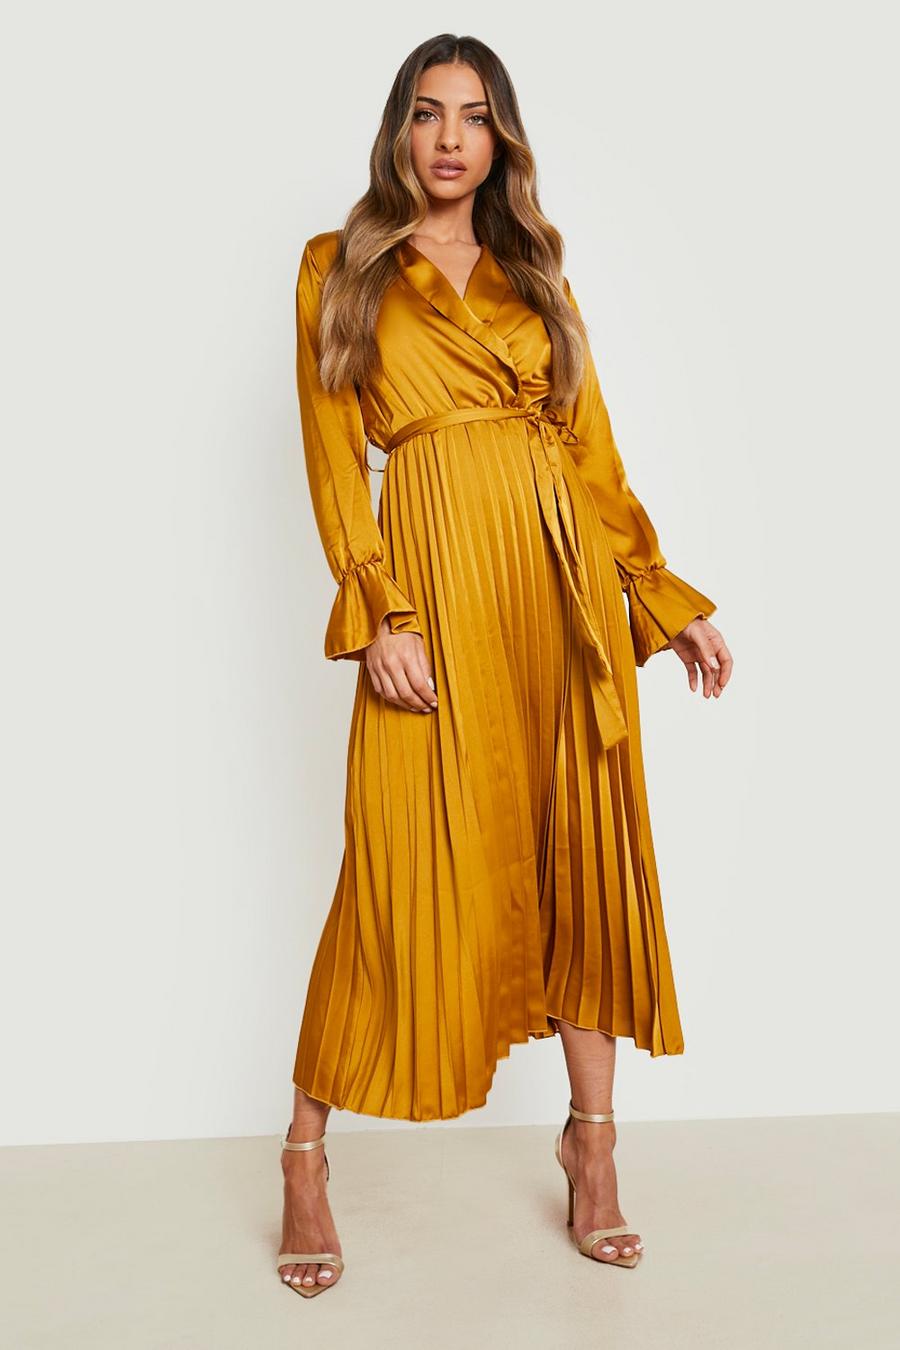 Mustard yellow Fit & Flare Dresses